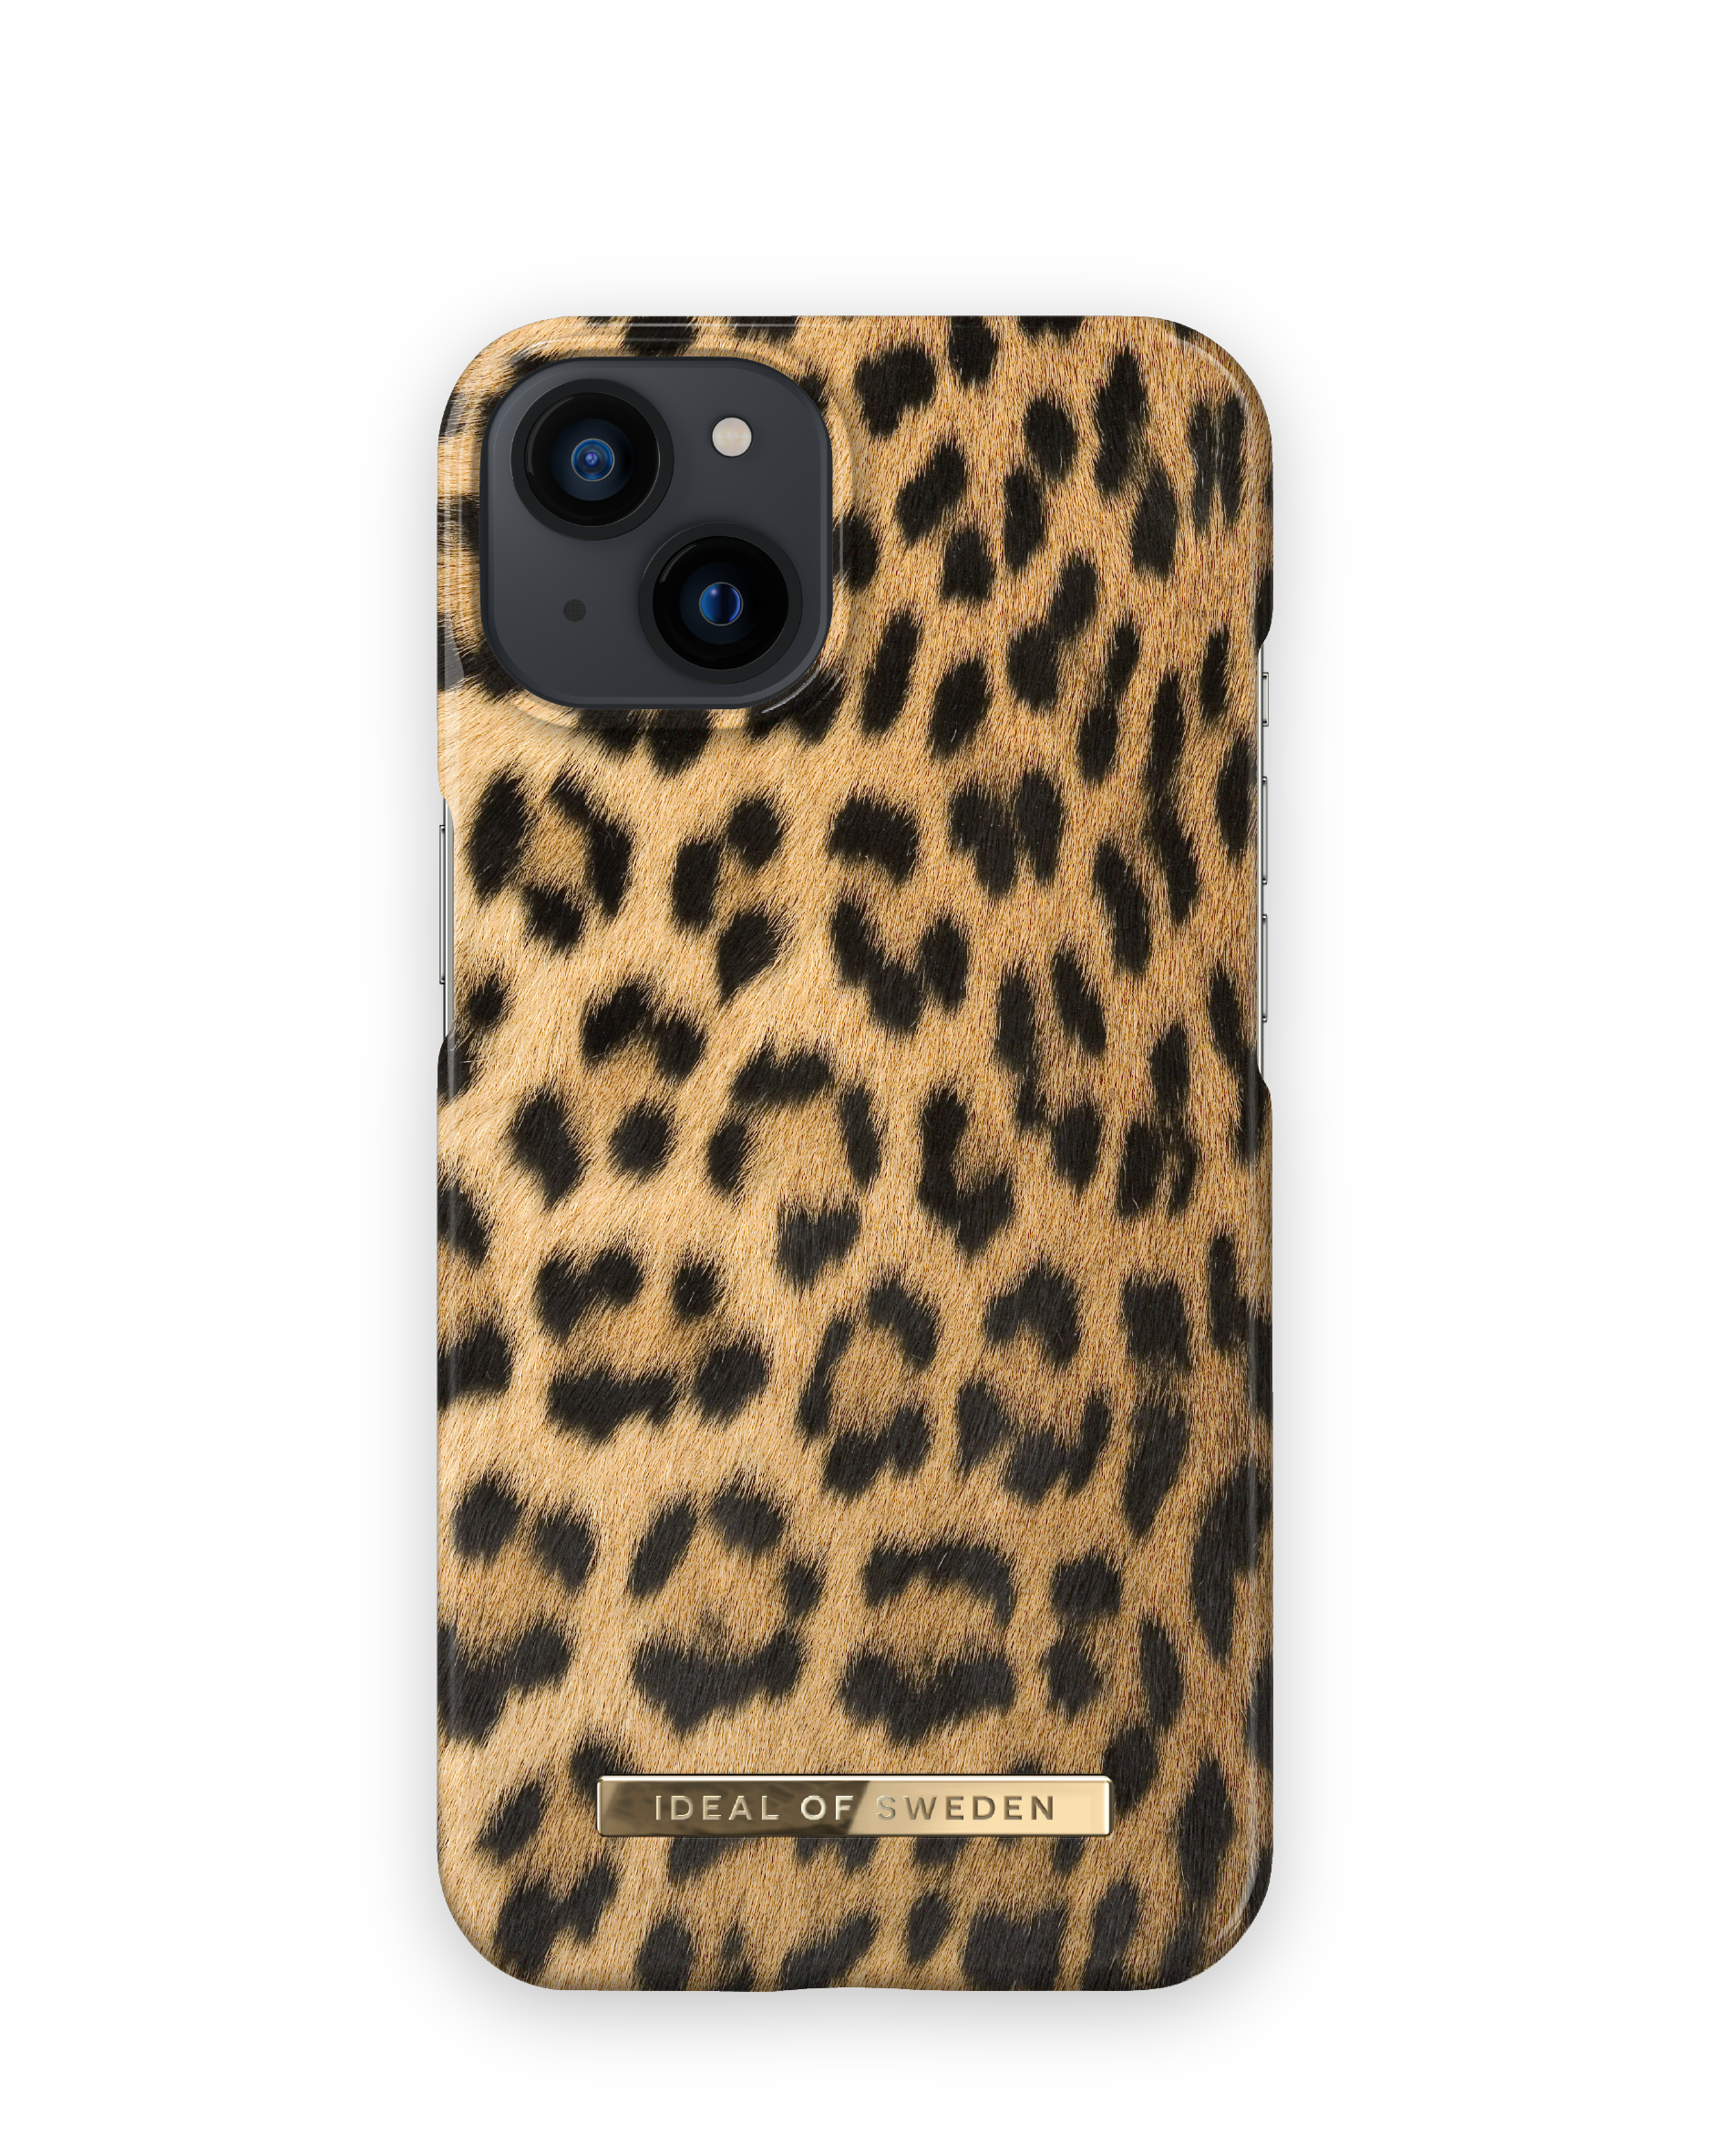 Wild SWEDEN Mini, 13 Apple, Leopard iPhone IDFCS17-I2154-67, Backcover, IDEAL OF